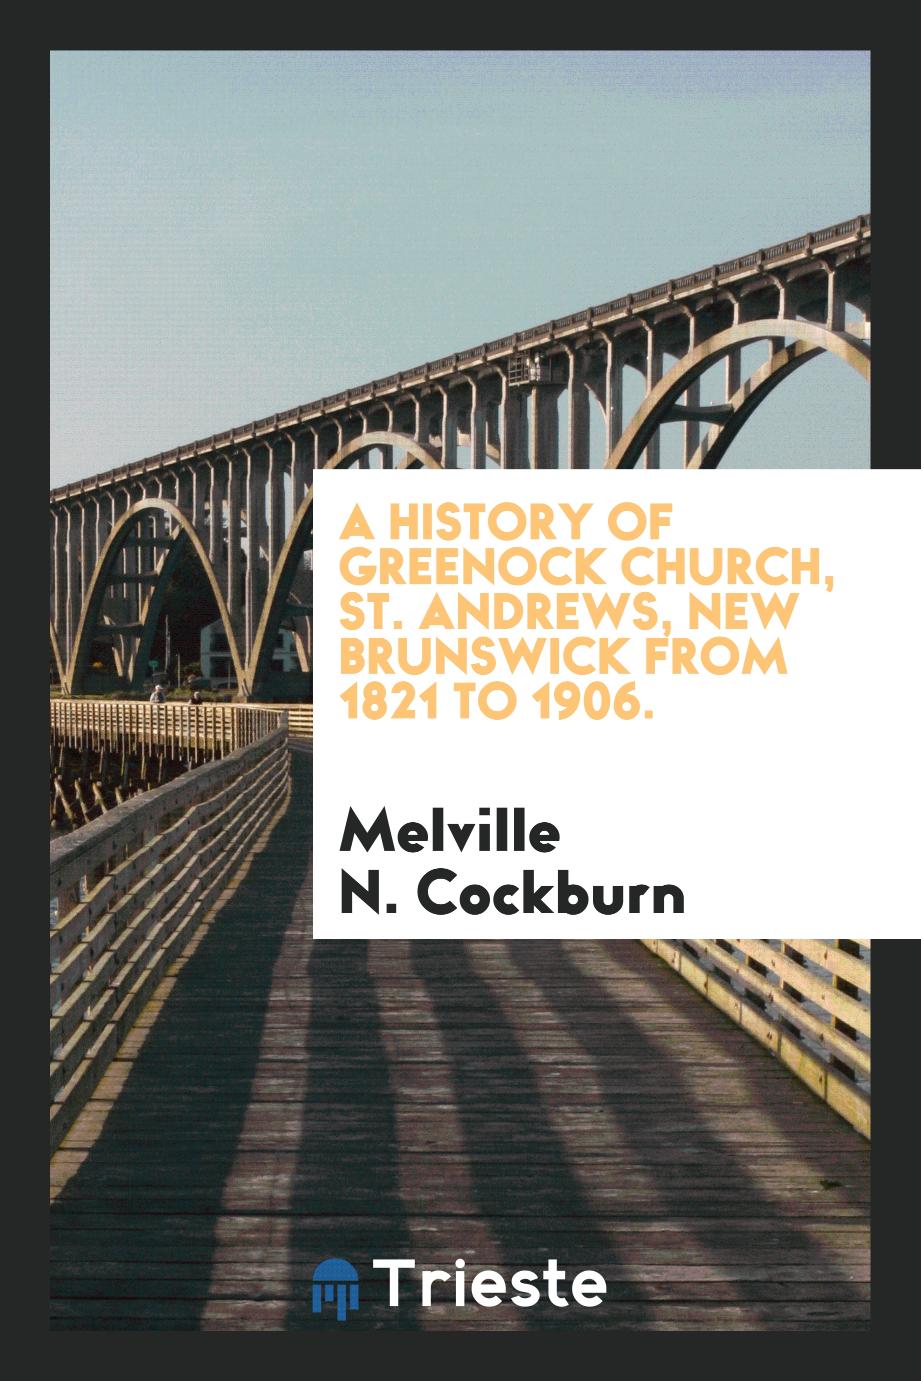 A history of Greenock Church, St. Andrews, New Brunswick from 1821 to 1906.